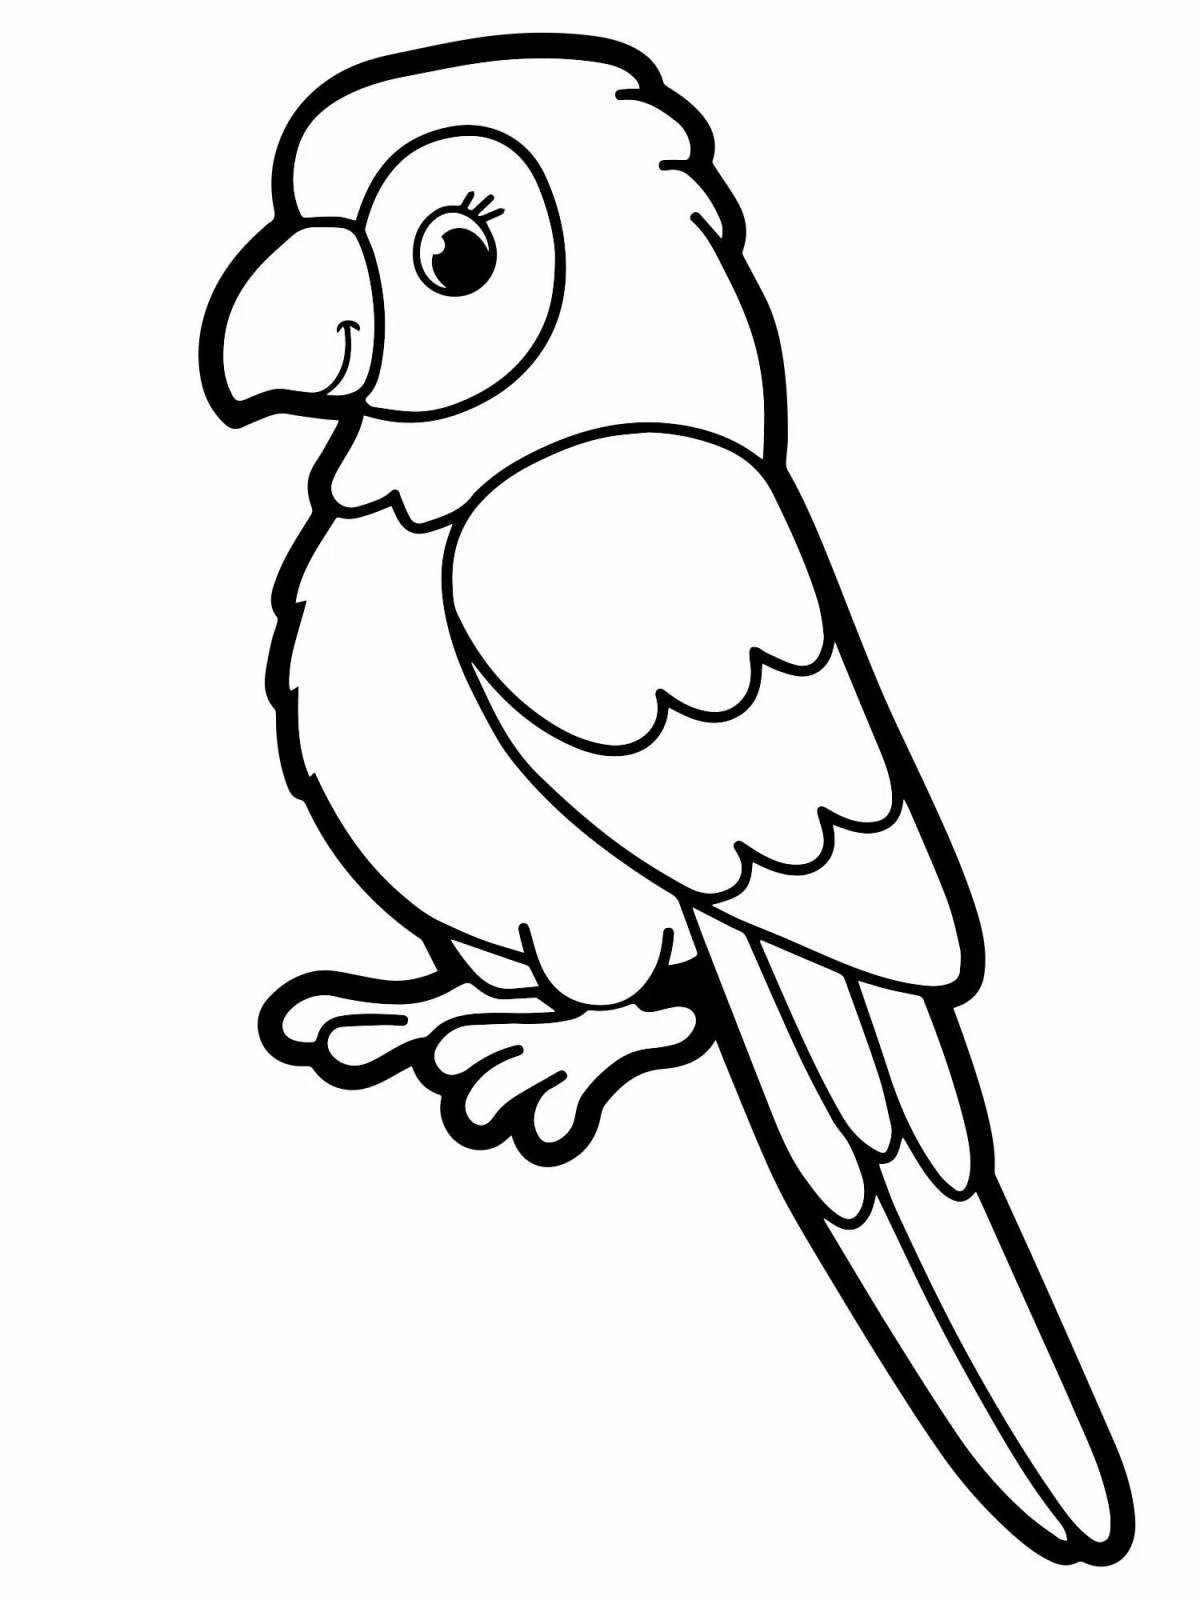 Impressive parrot coloring book for kids 6-7 years old